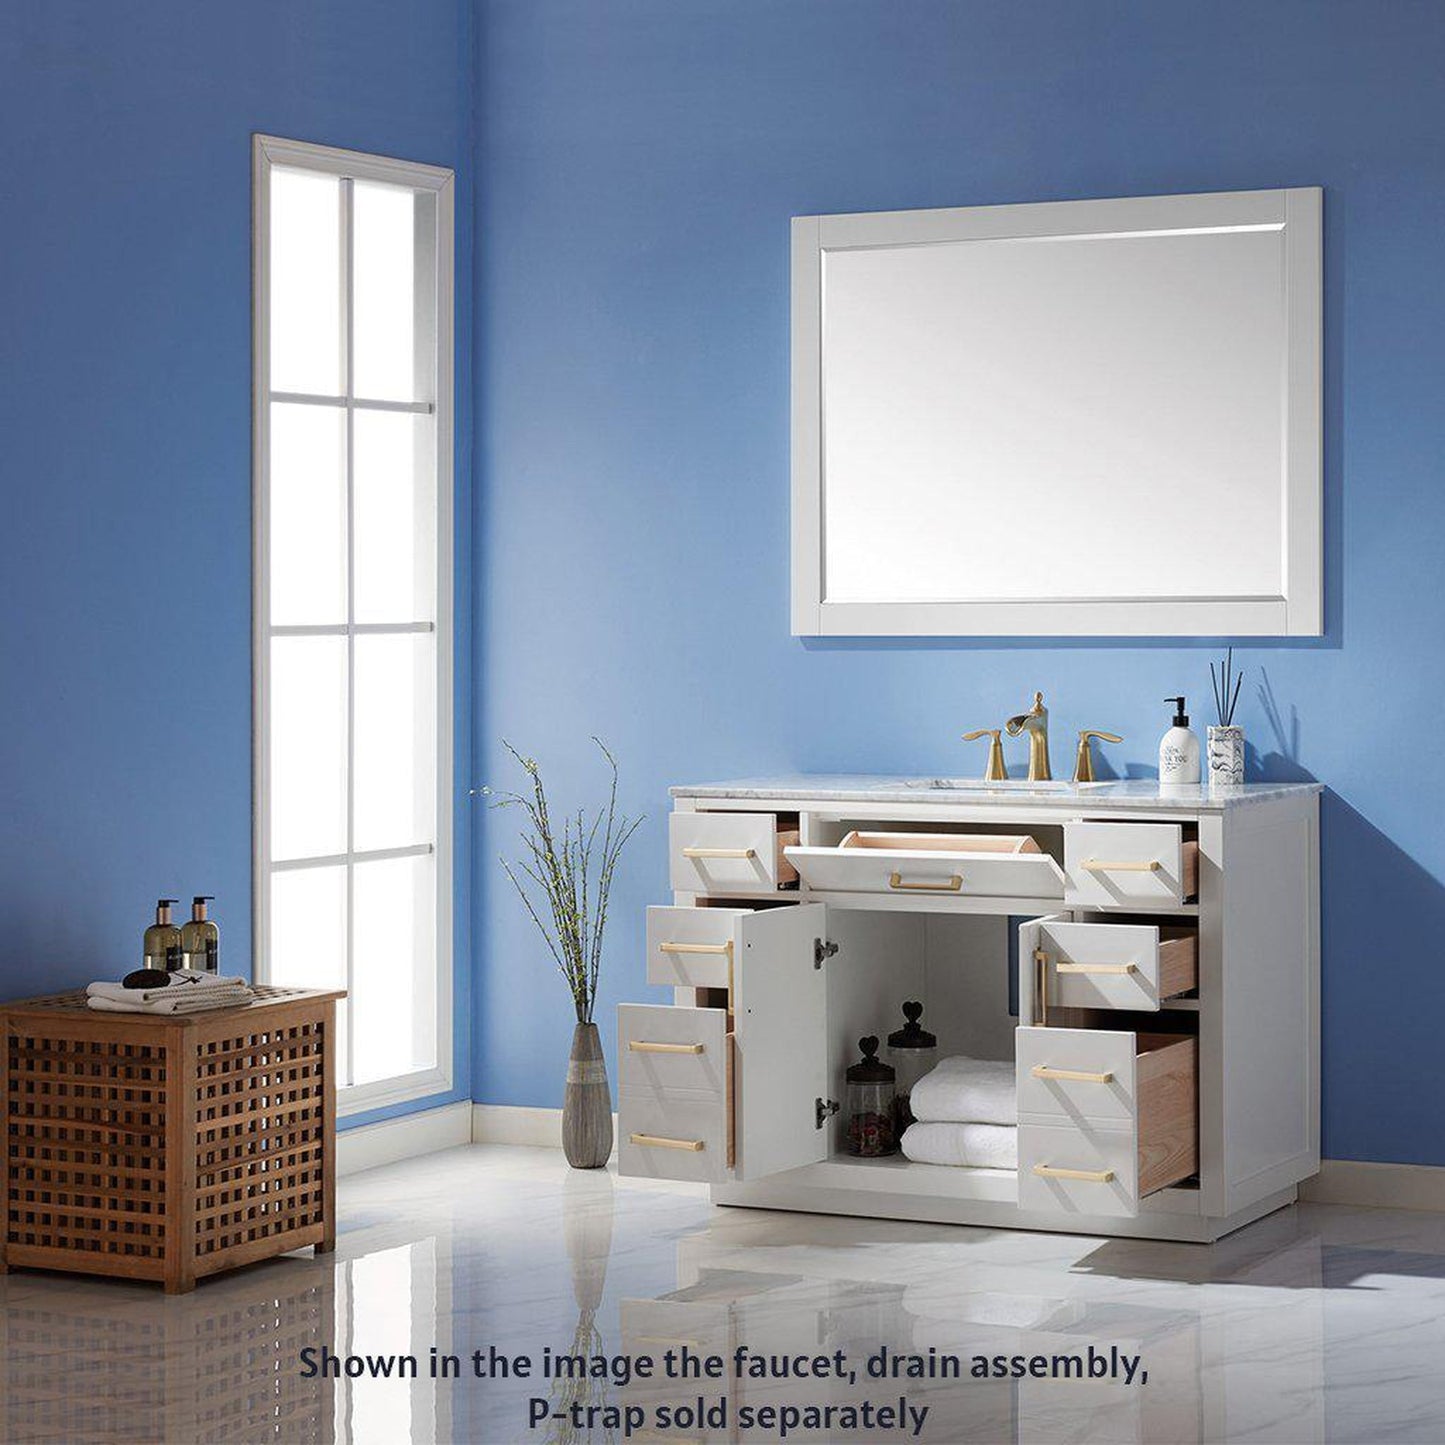 Altair Ivy 48" Single White Freestanding Bathroom Vanity Set With Mirror, Natural Carrara White Marble Top, Rectangular Undermount Ceramic Sink, and Overflow